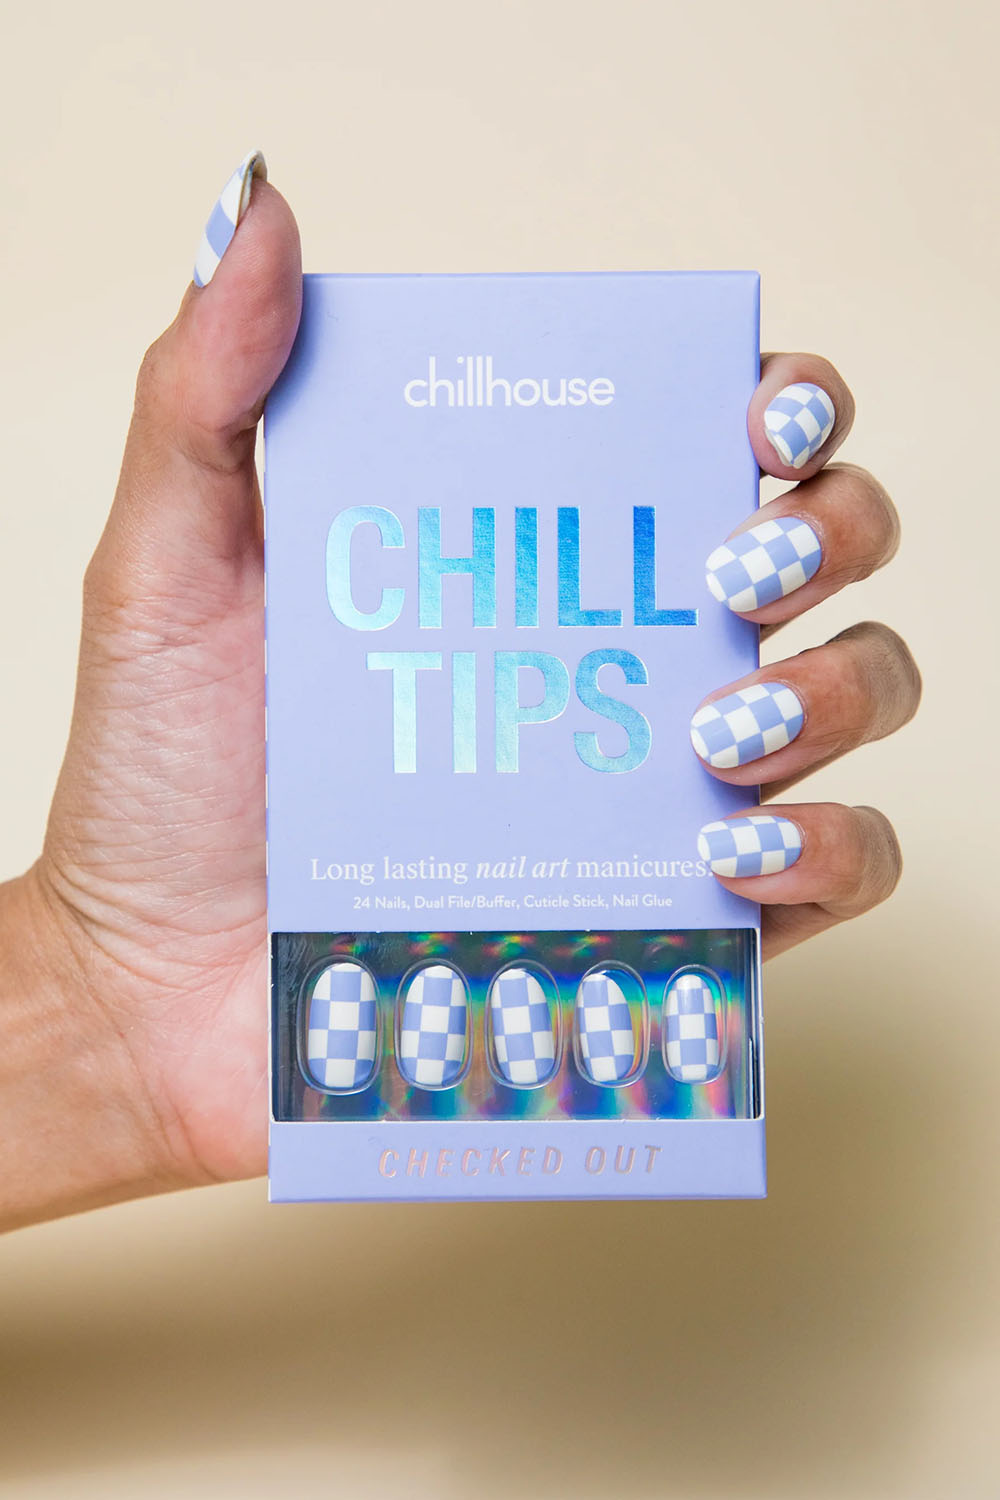 Chillhouse - Chill Tips - Checked Out